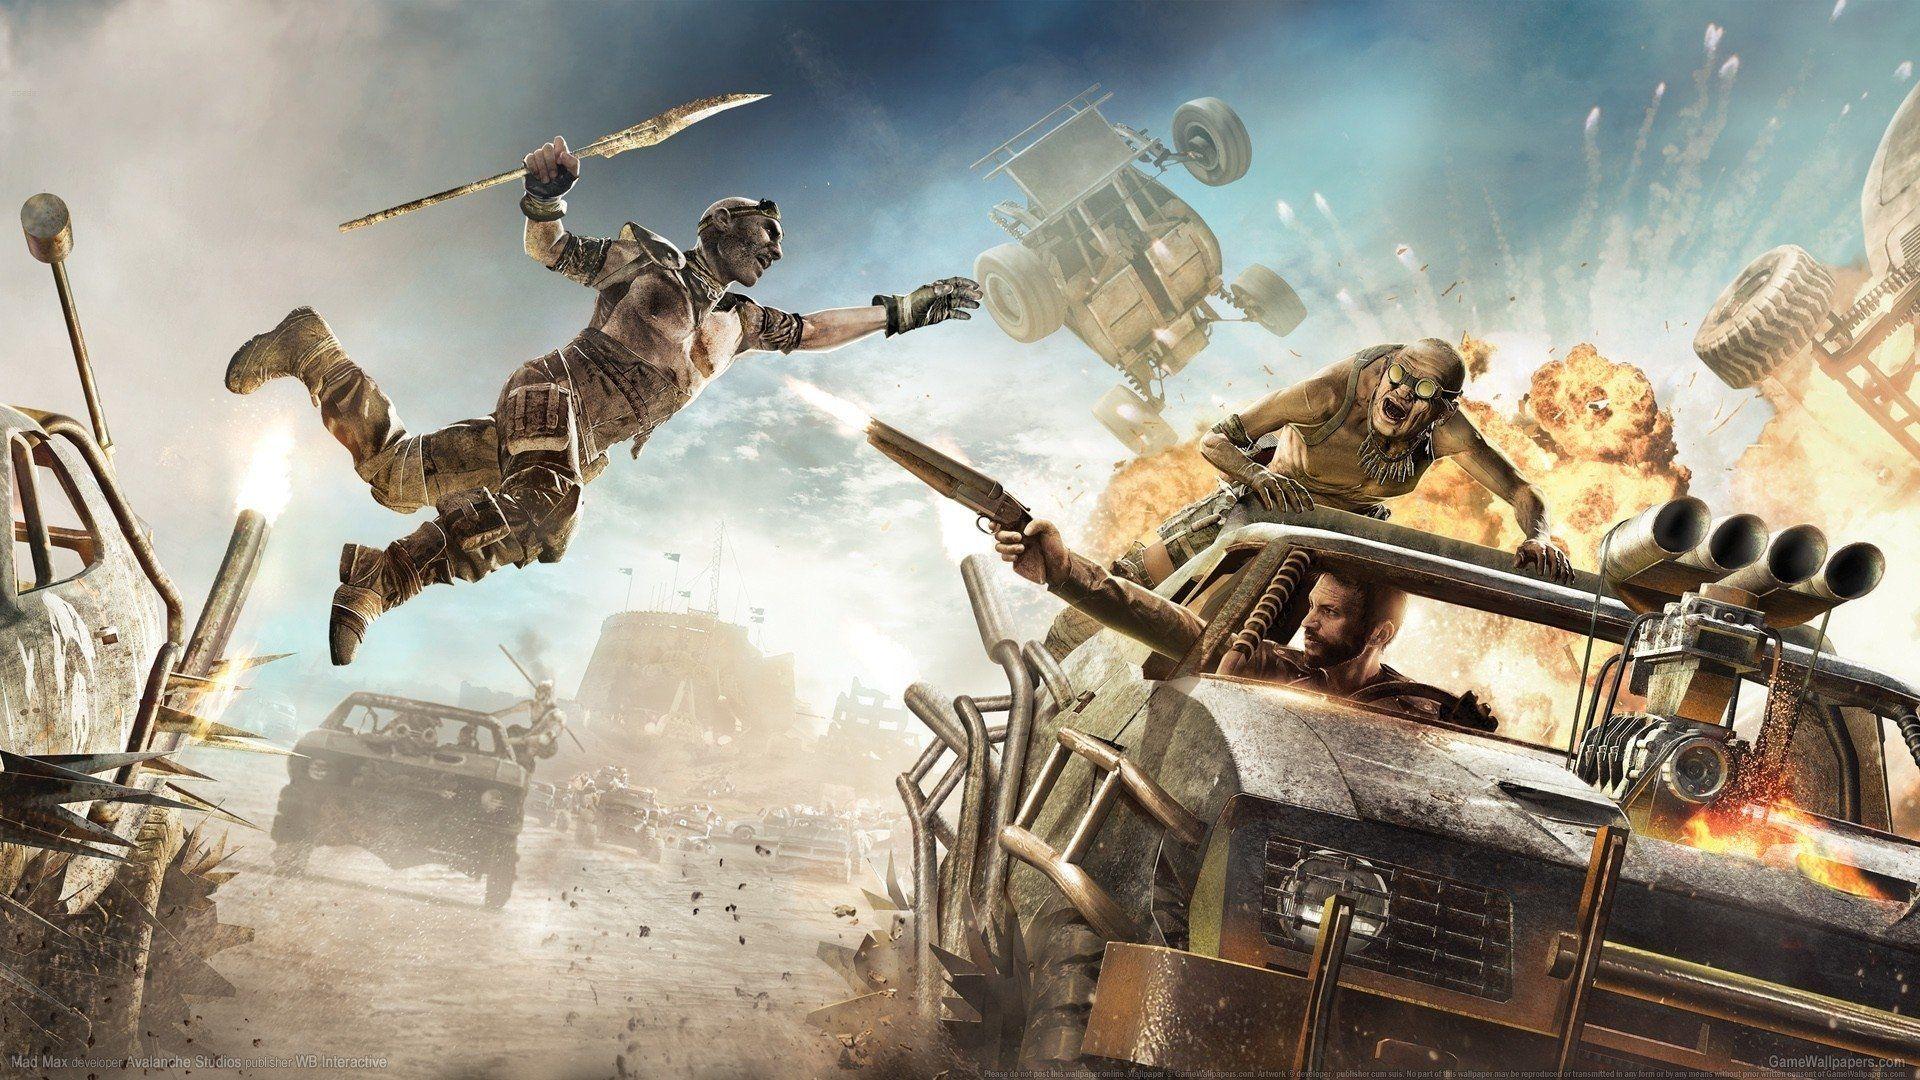 mad max game free